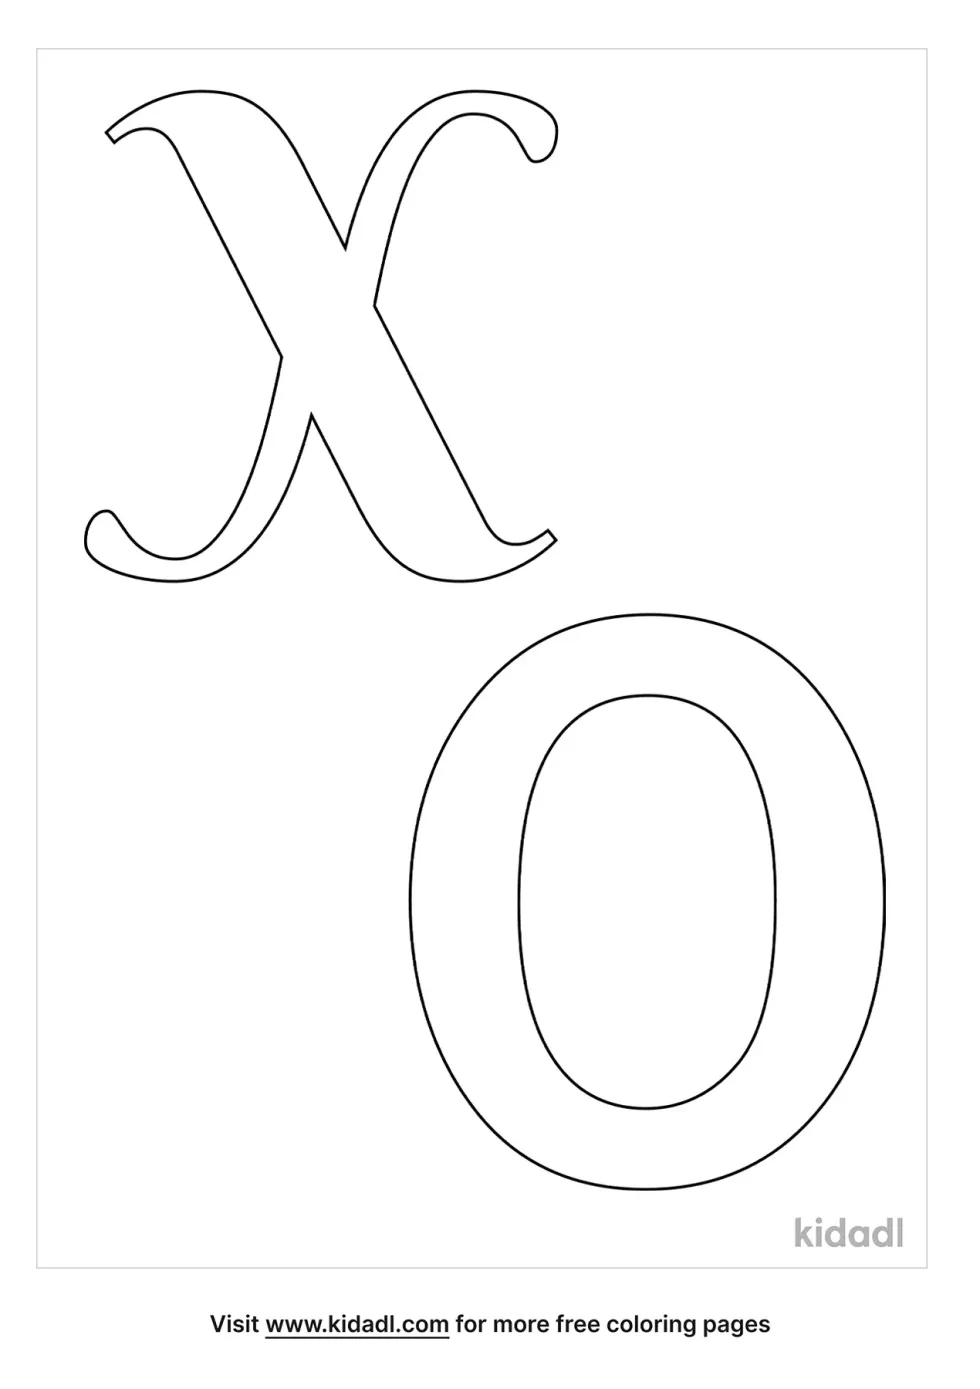 X And O Coloring Page